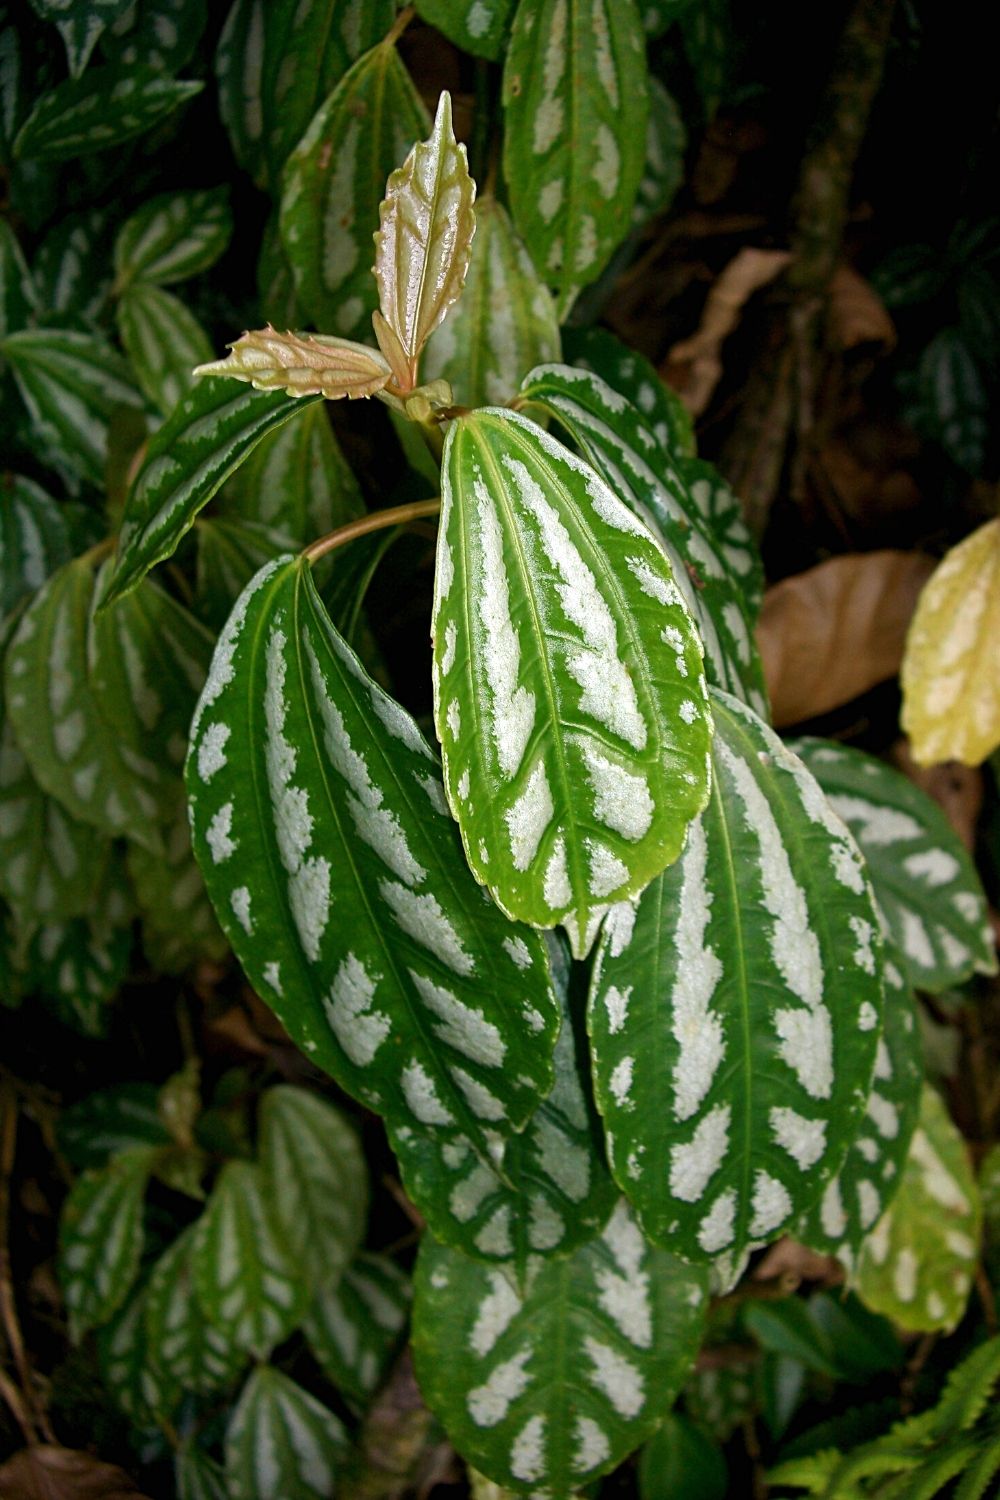 Aluminum plant is another great plant to grow in a terrarium due to its leaves having silvery stripes